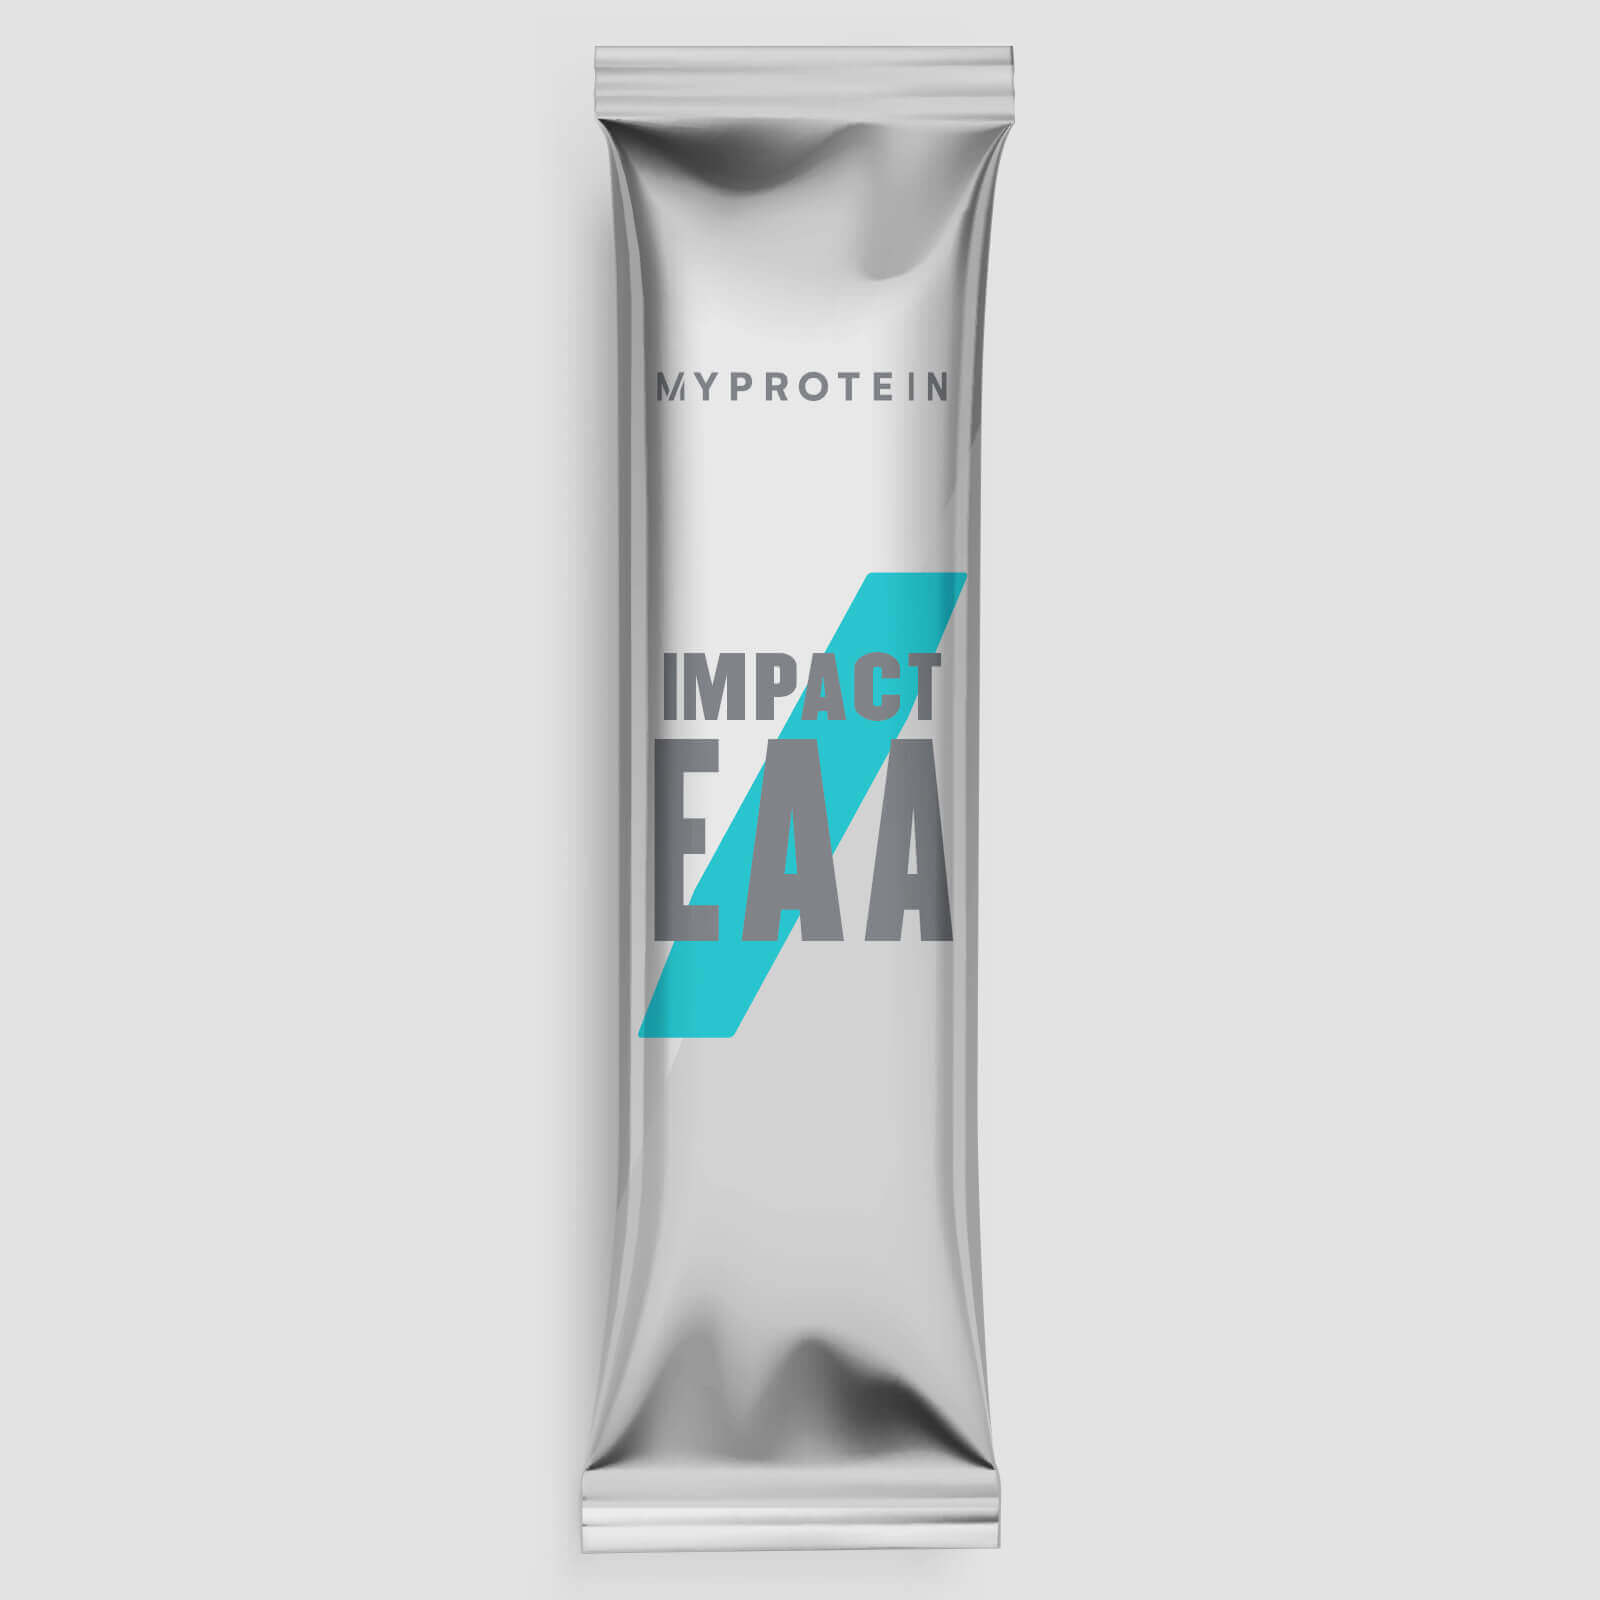 Myprotein Impact EAA Stick Pack (Sample)